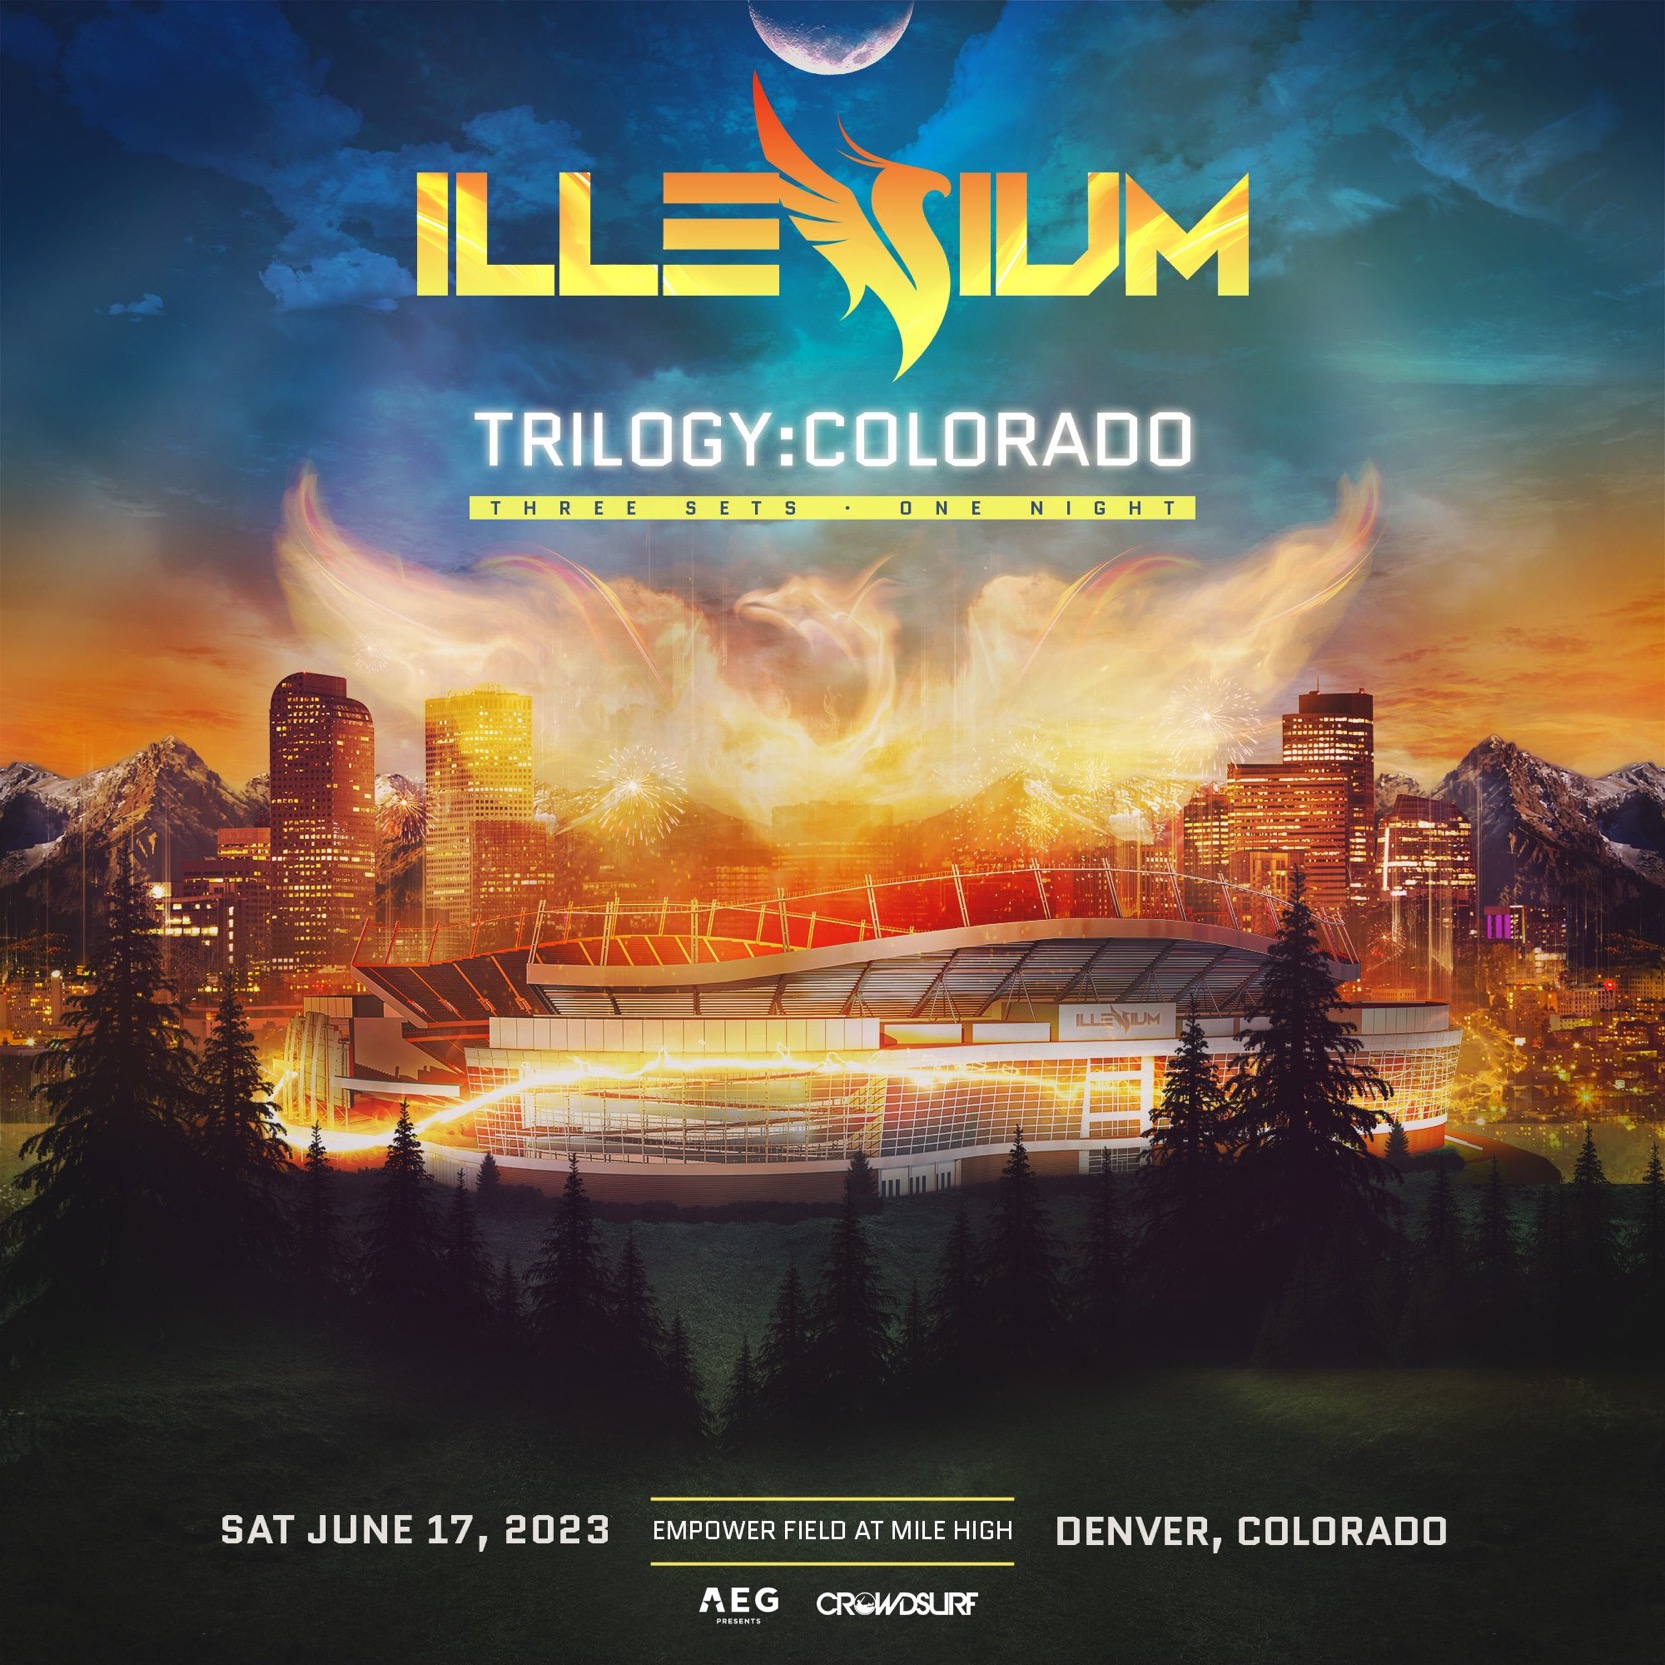 ILLENIUM on X: Just released 2 of my favorite fan made designs in